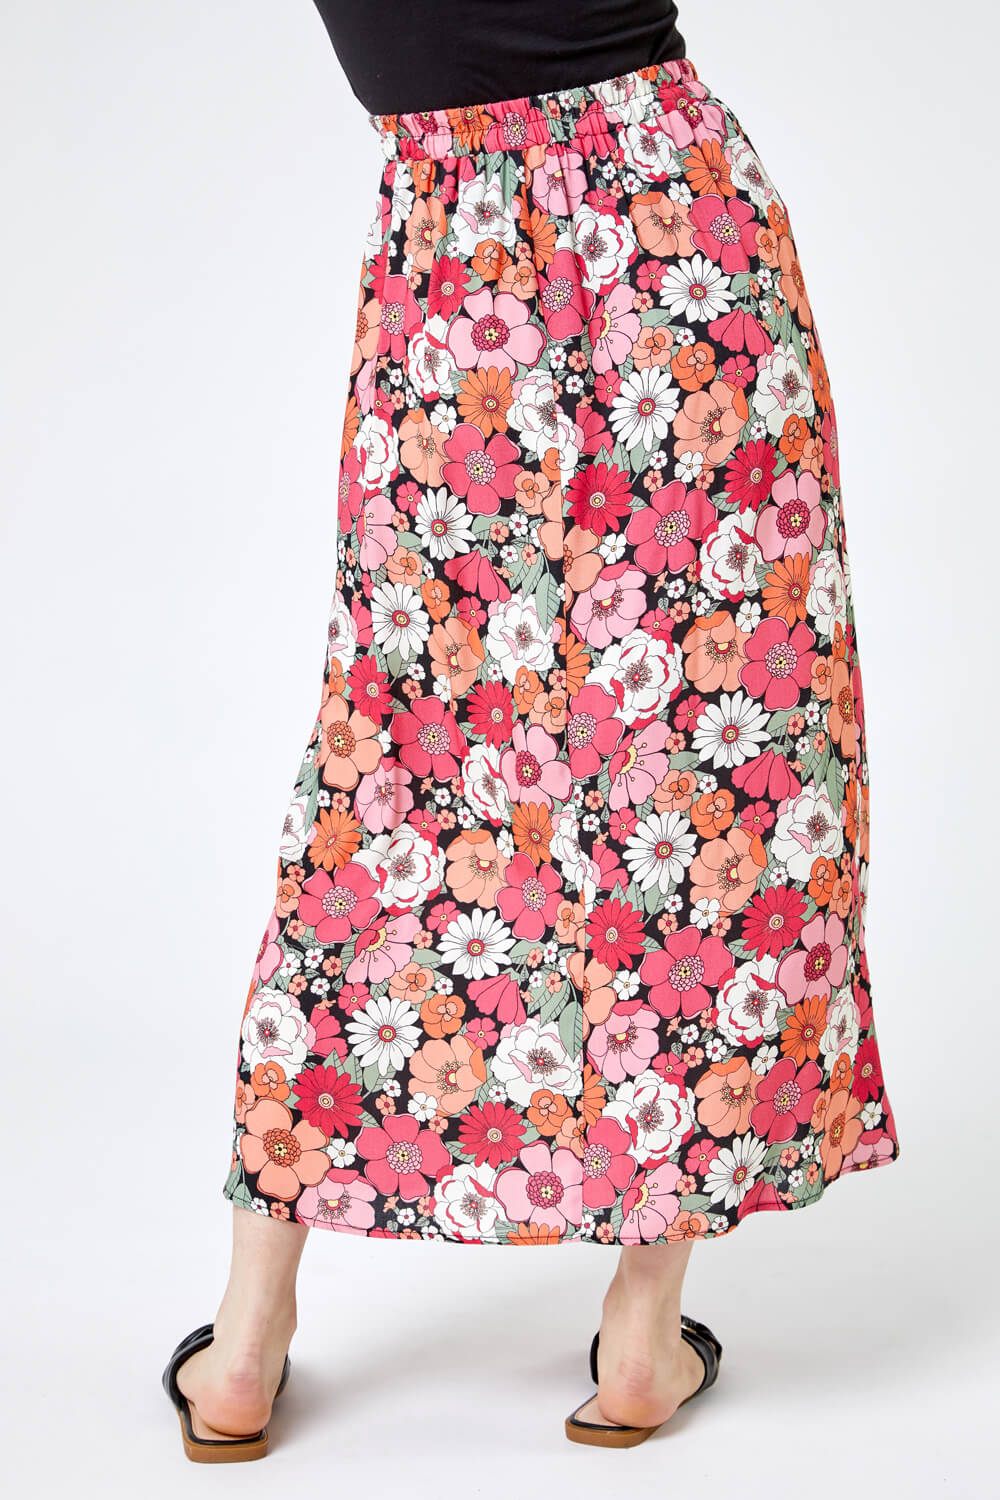 CORAL Petite Floral Print A-Line Skirt, Image 2 of 4